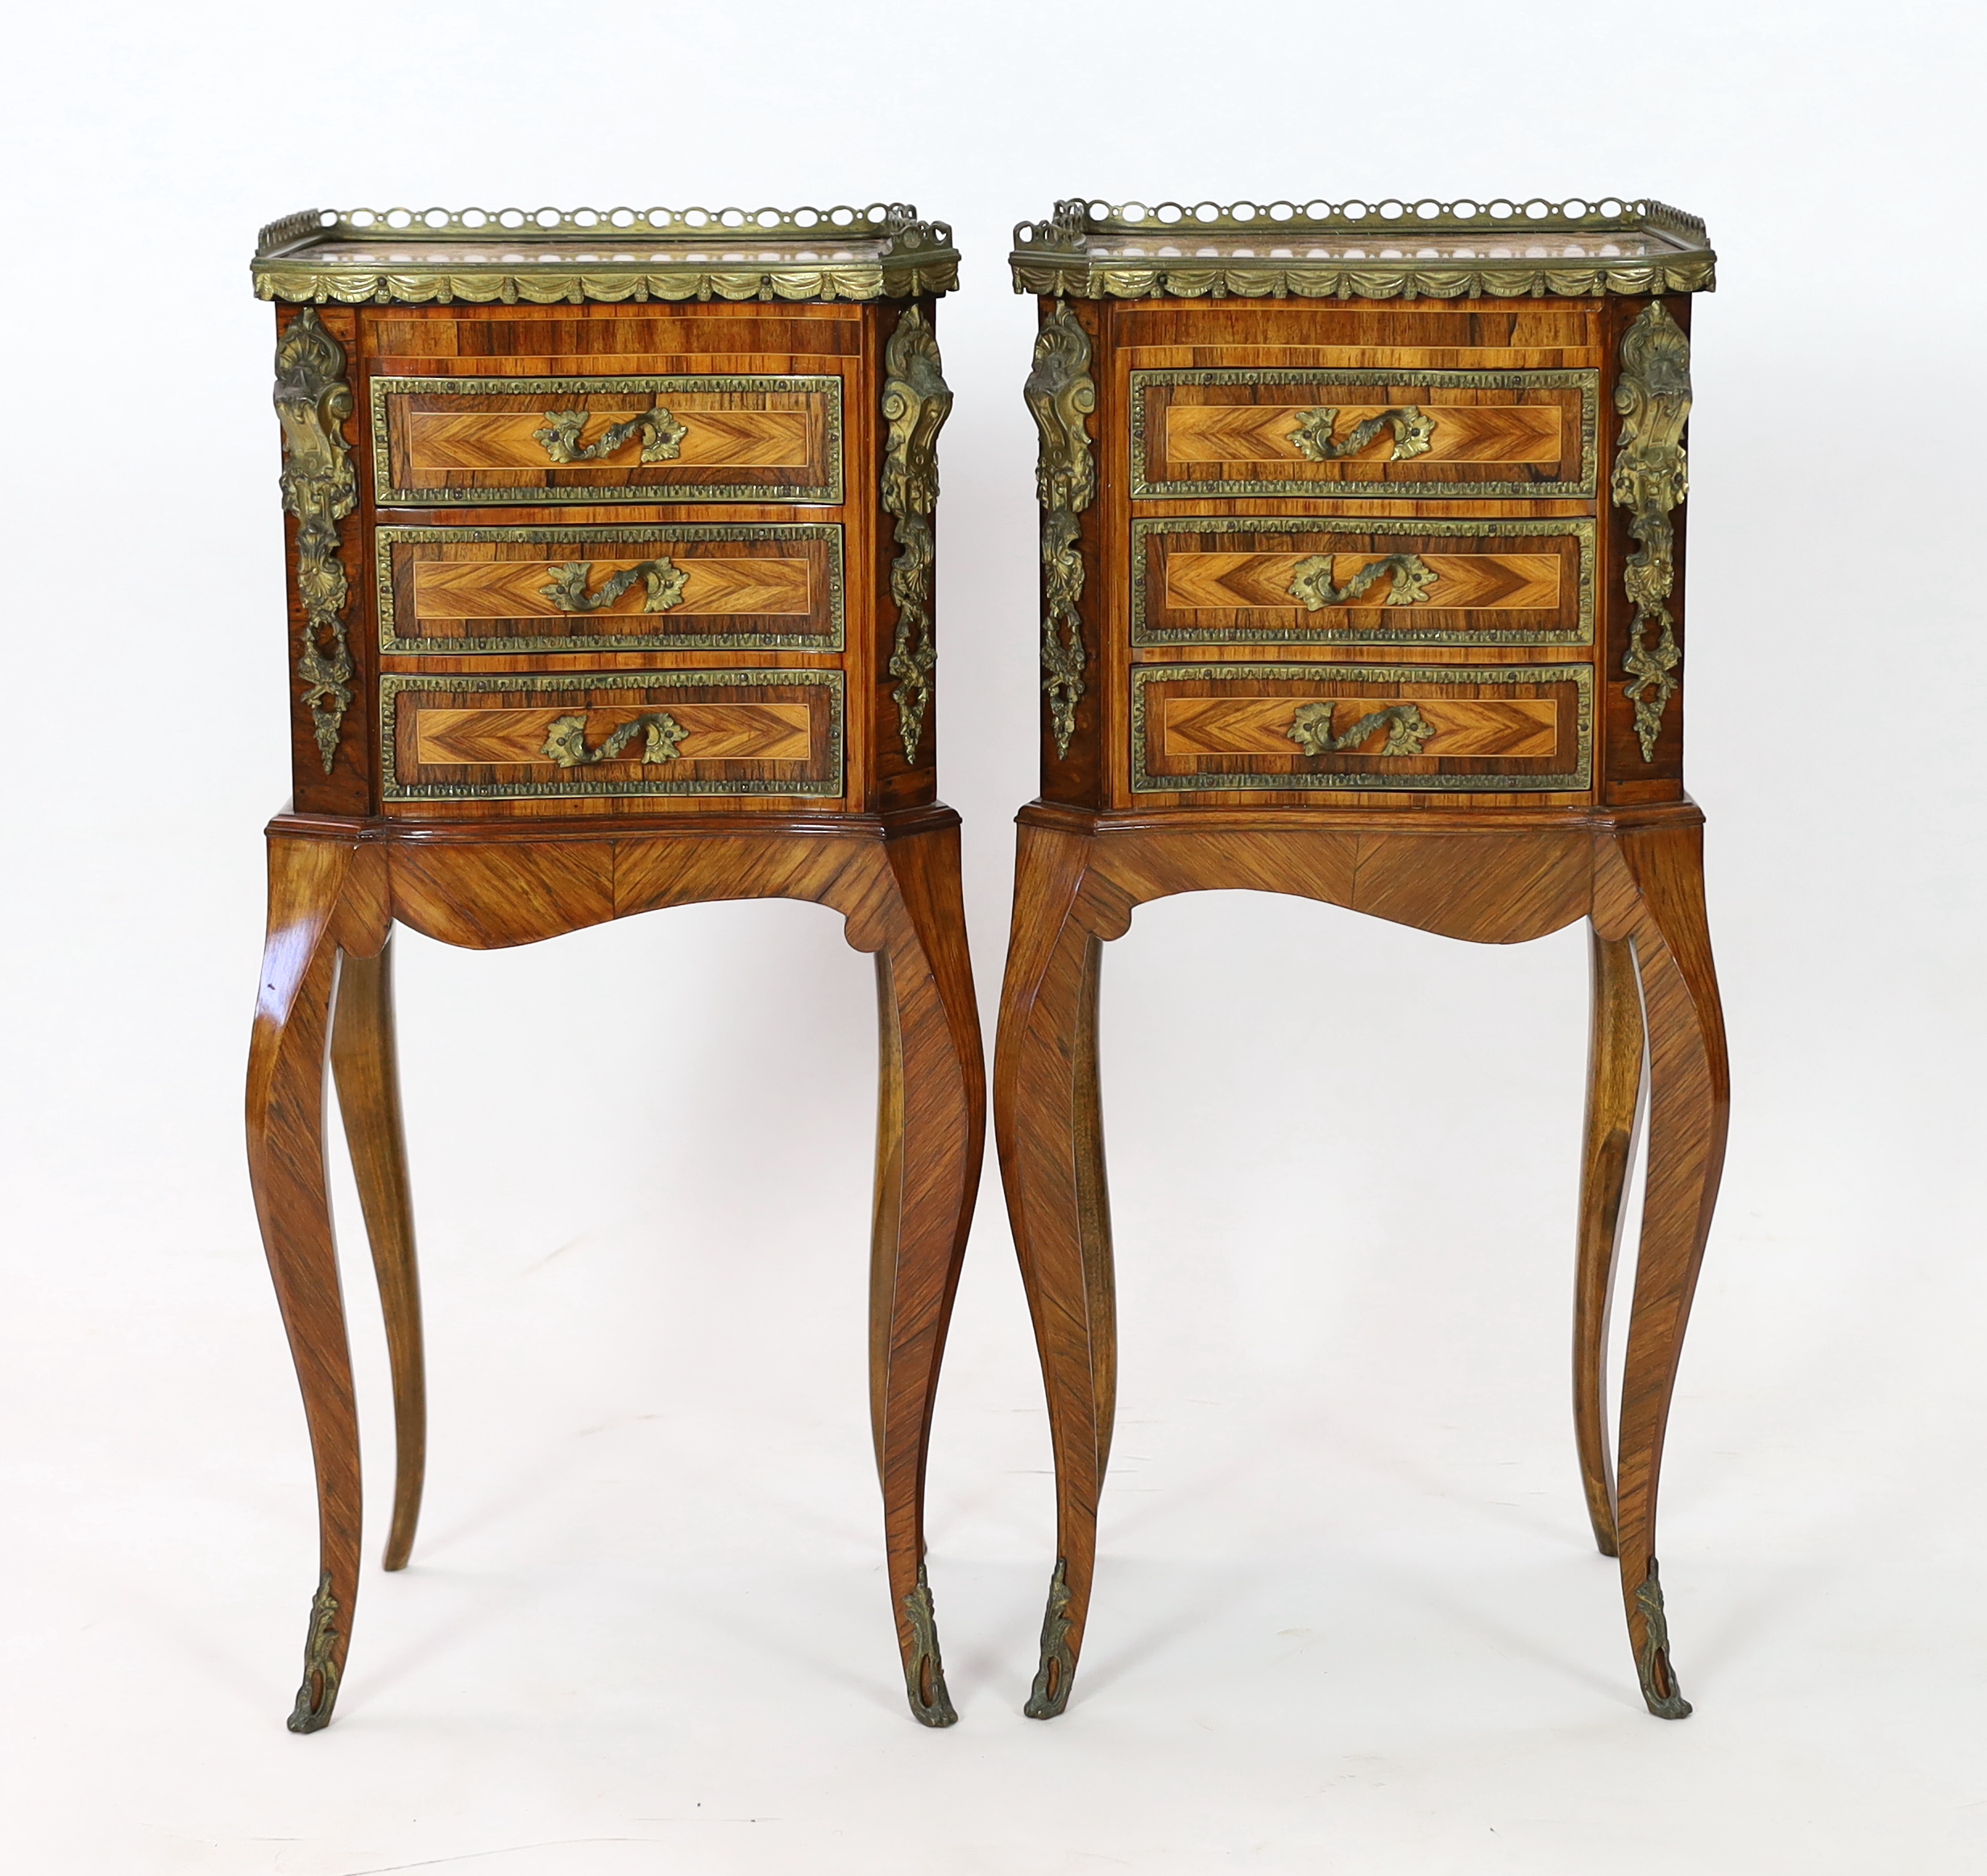 A pair of Louis XVI style ormolu mounted kingwood bedside chests, each of asymmetrical scroll form - Image 2 of 3